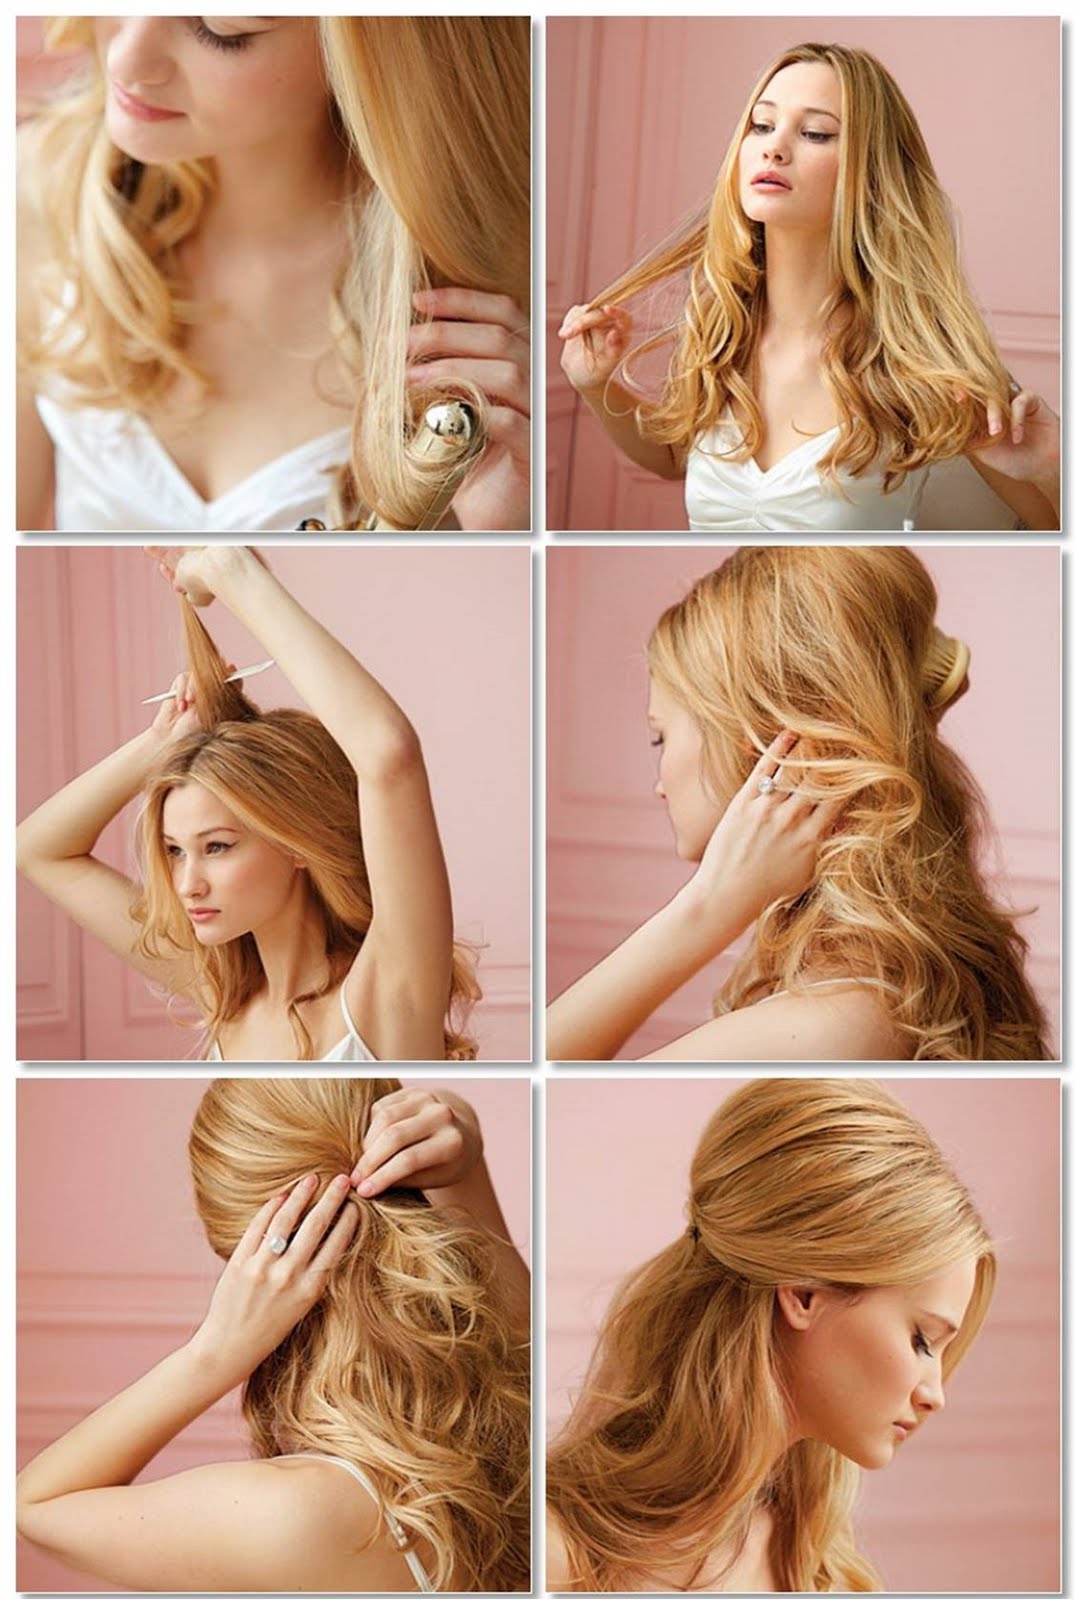 1000 images about Frisuren on Pinterest  Updo, Braided buns and 